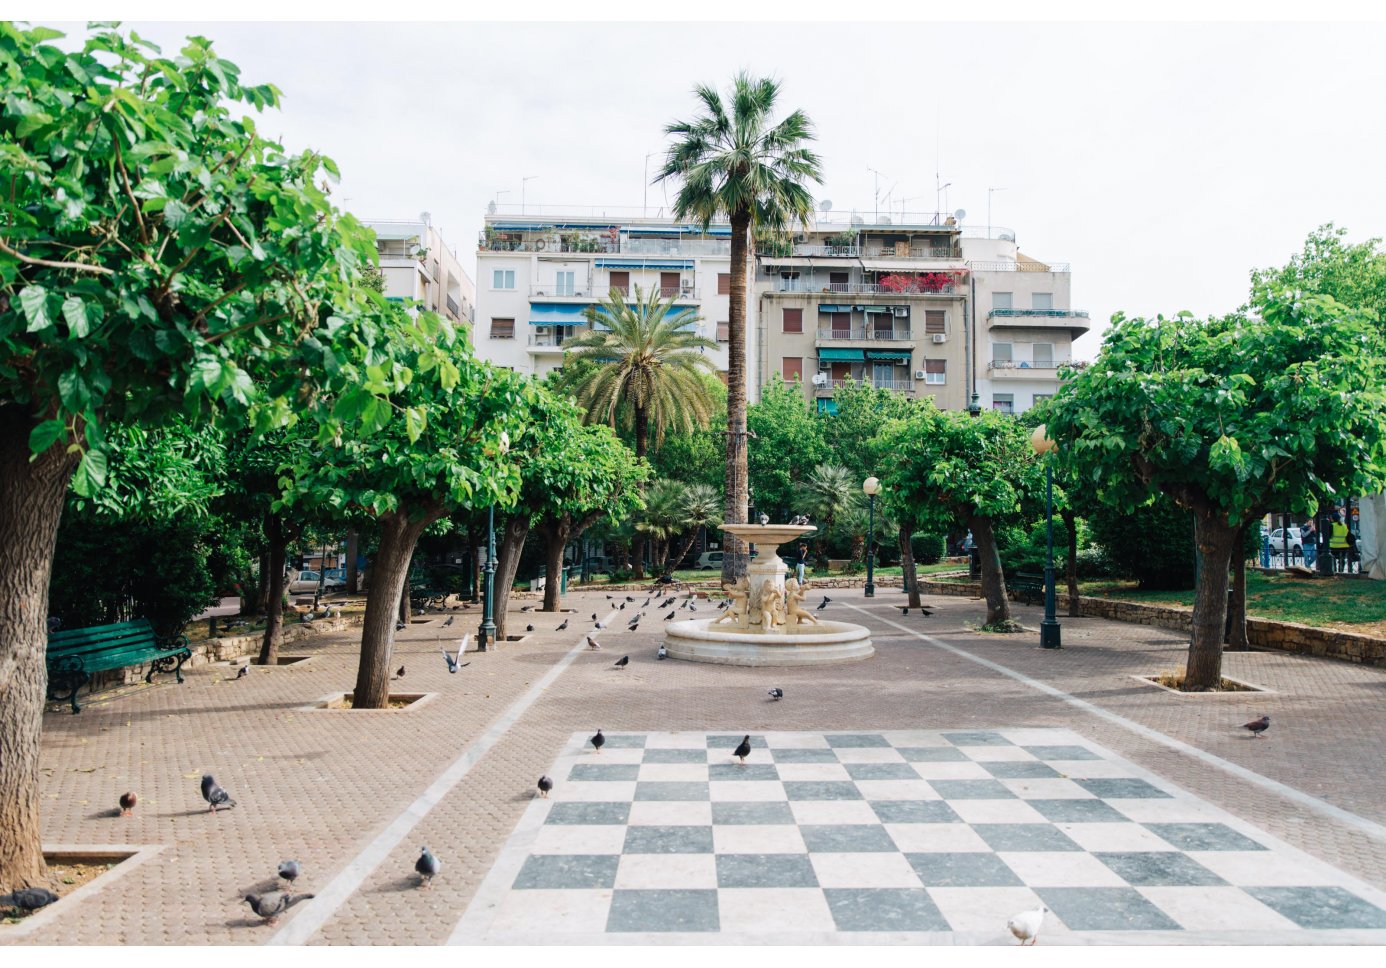 a square with trees and a fountain, birds around.